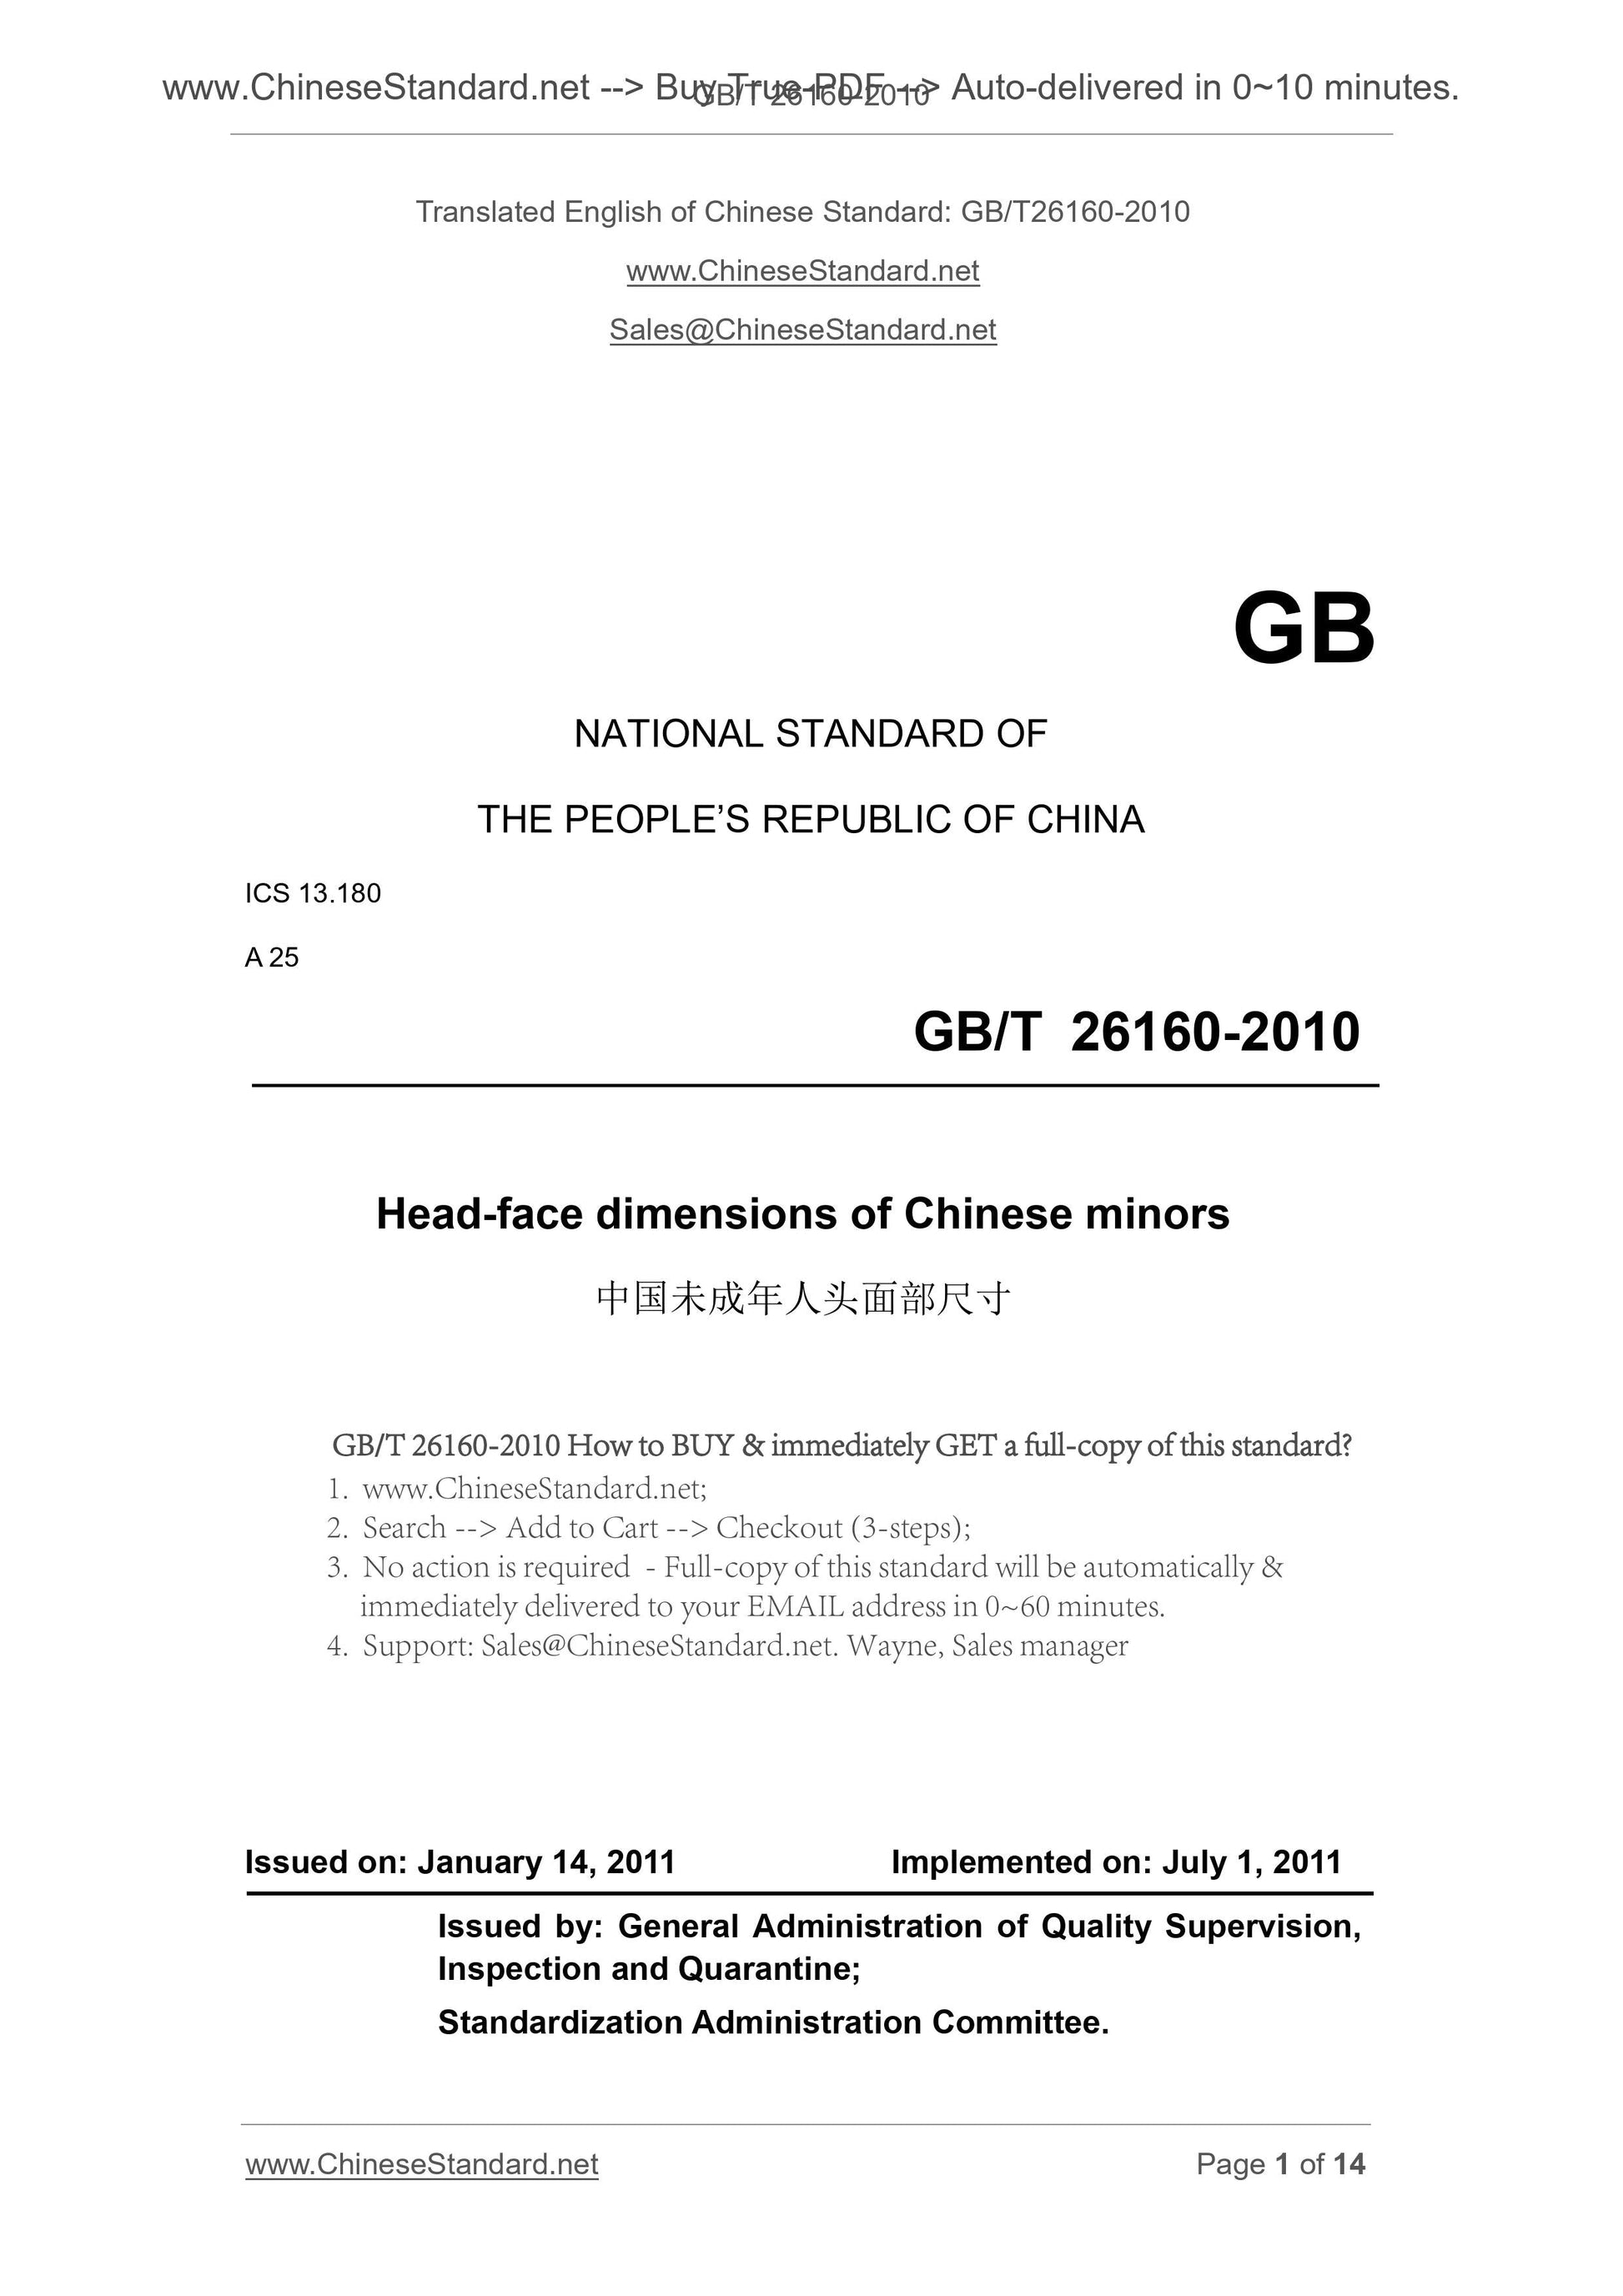 GB/T 26160-2010 Page 1